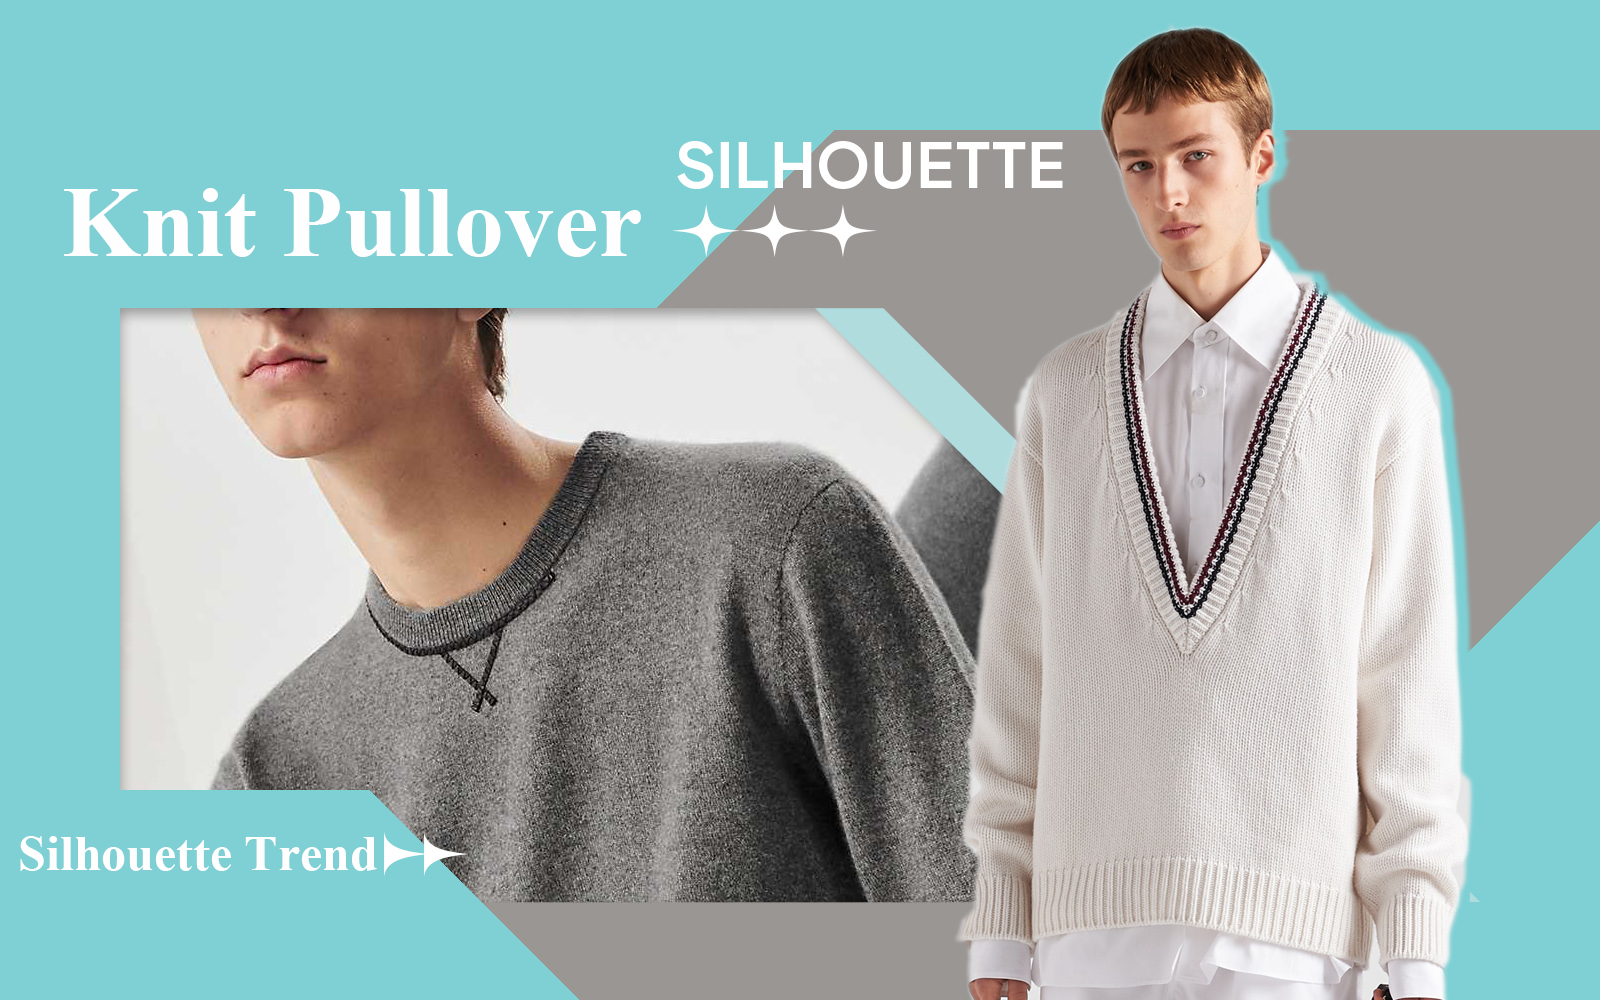 The Silhouette Trend for Men's Knit Pullover